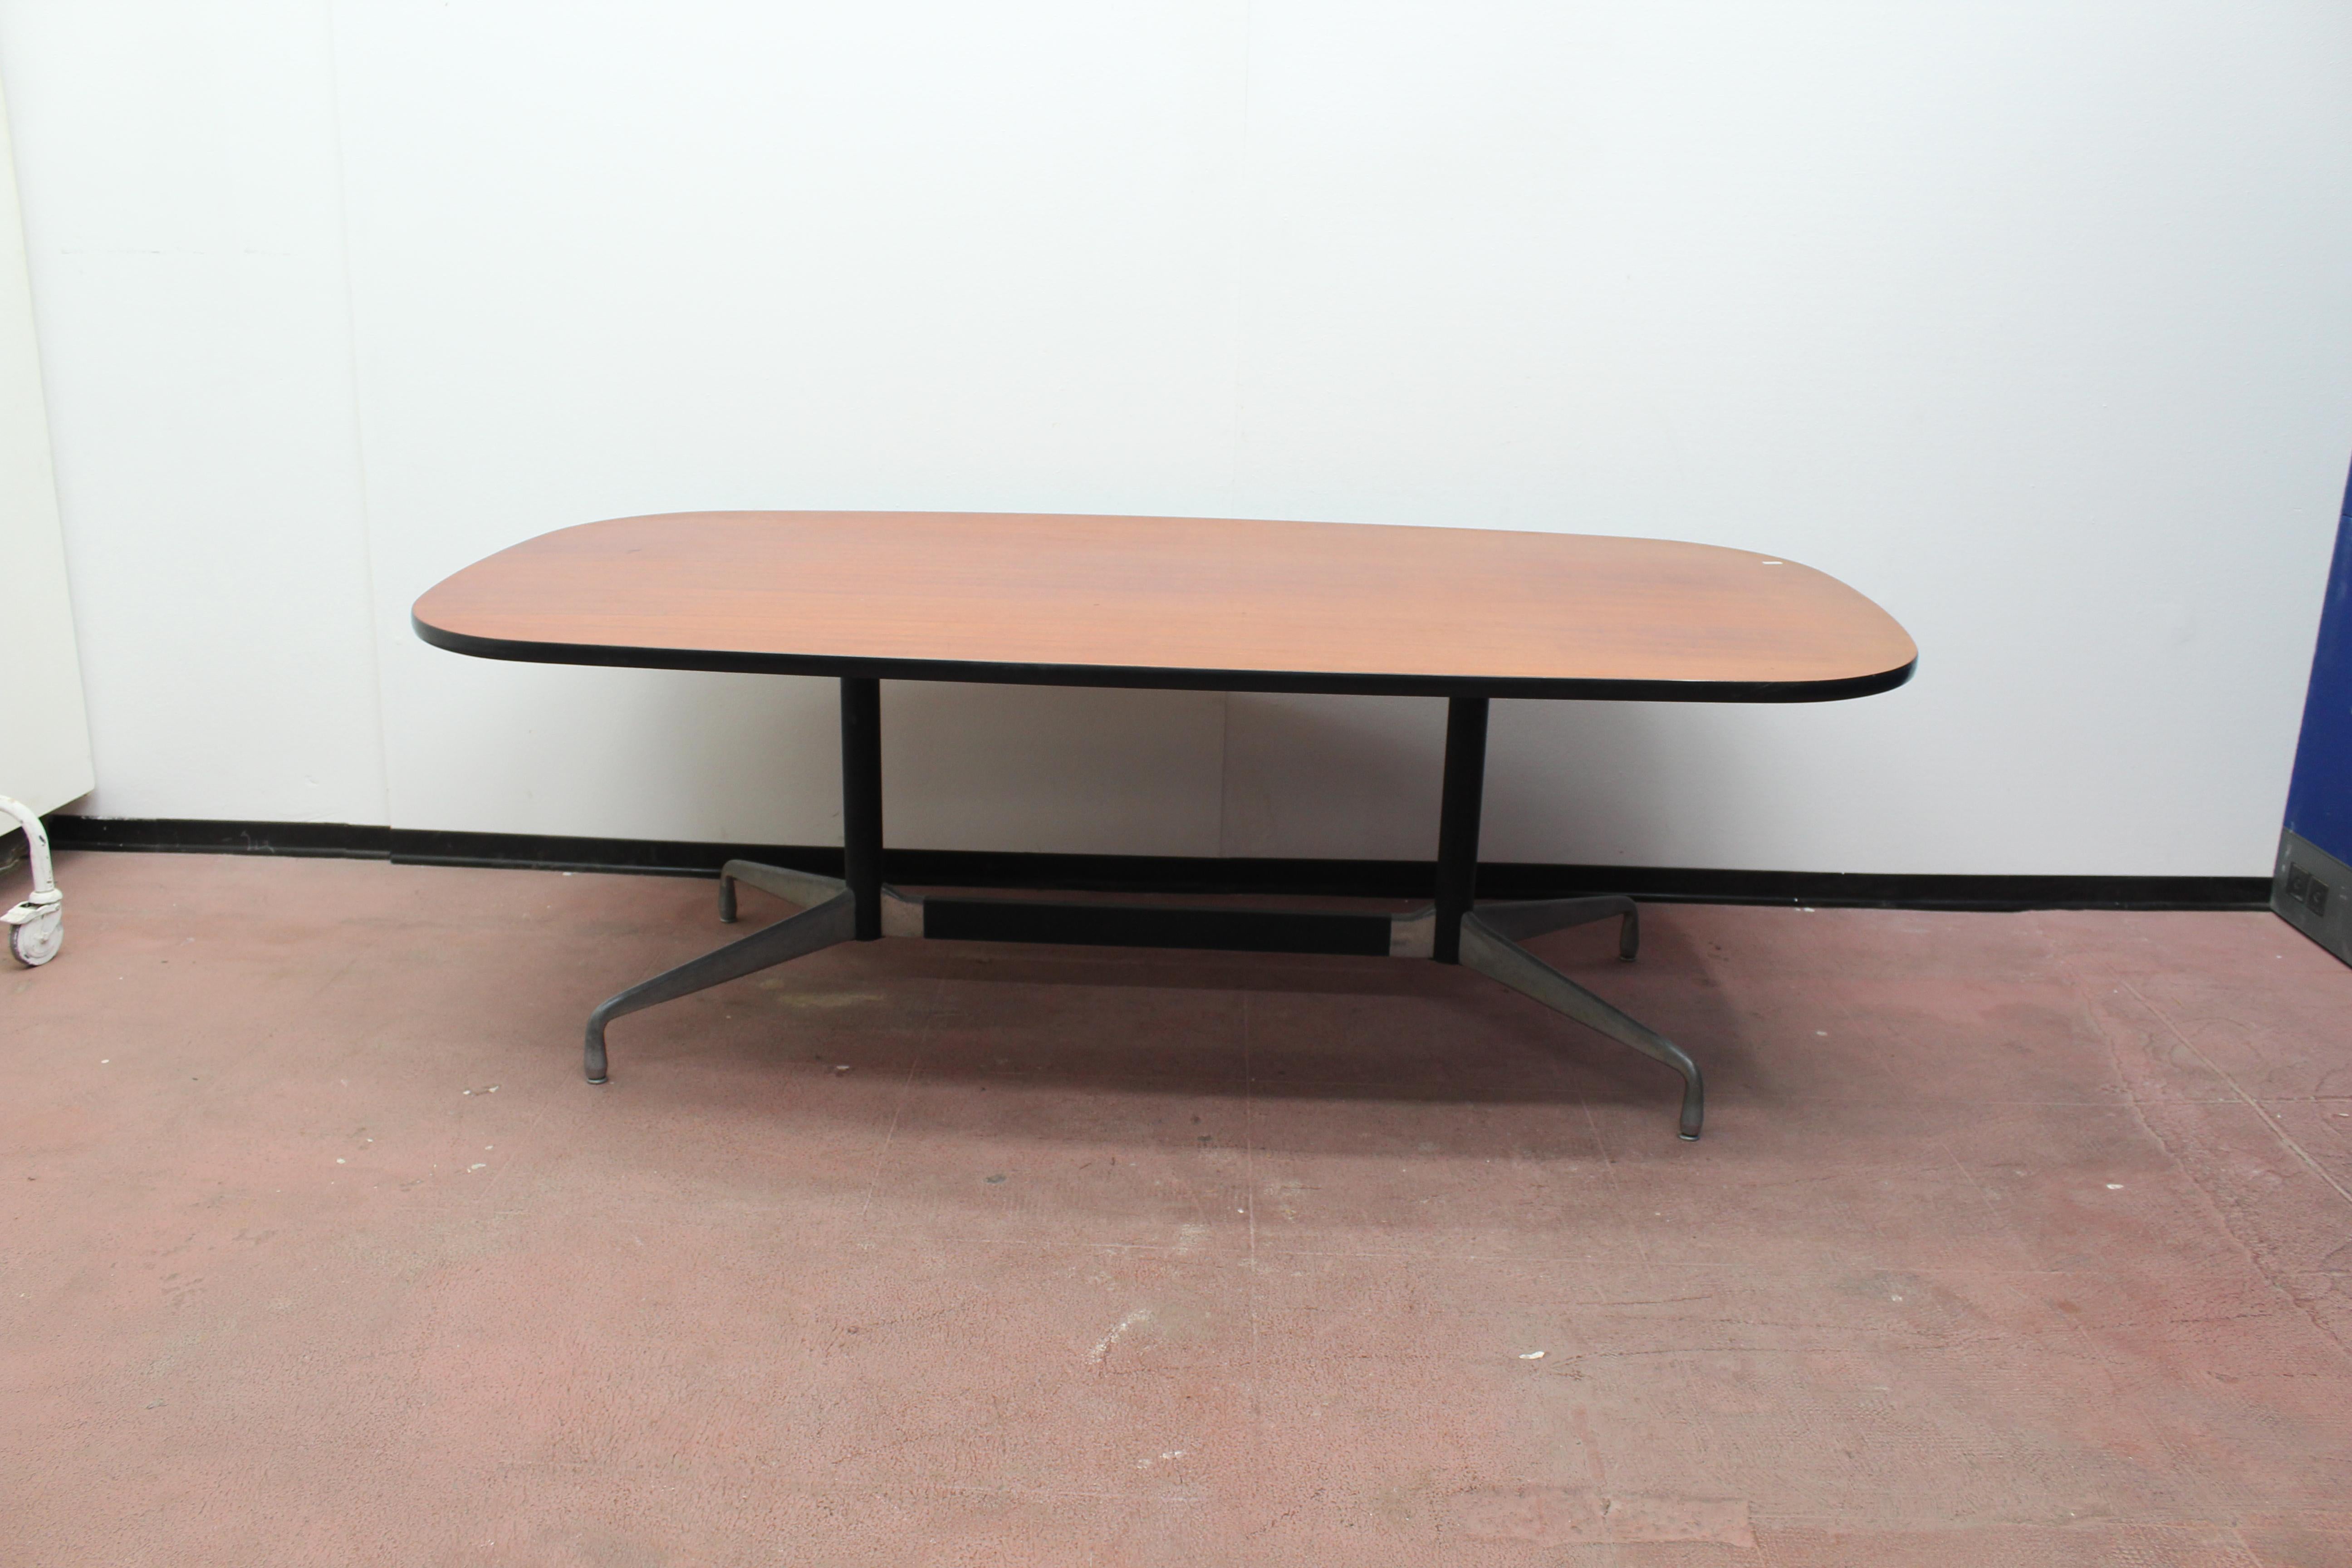 Model Segmented conference table with ashwood top, designed by Charles Eames for Herman Miller in 1964. With very simple and clean design lines, this table can be inserted into any furniture.
Wear consistent with age and use.
 